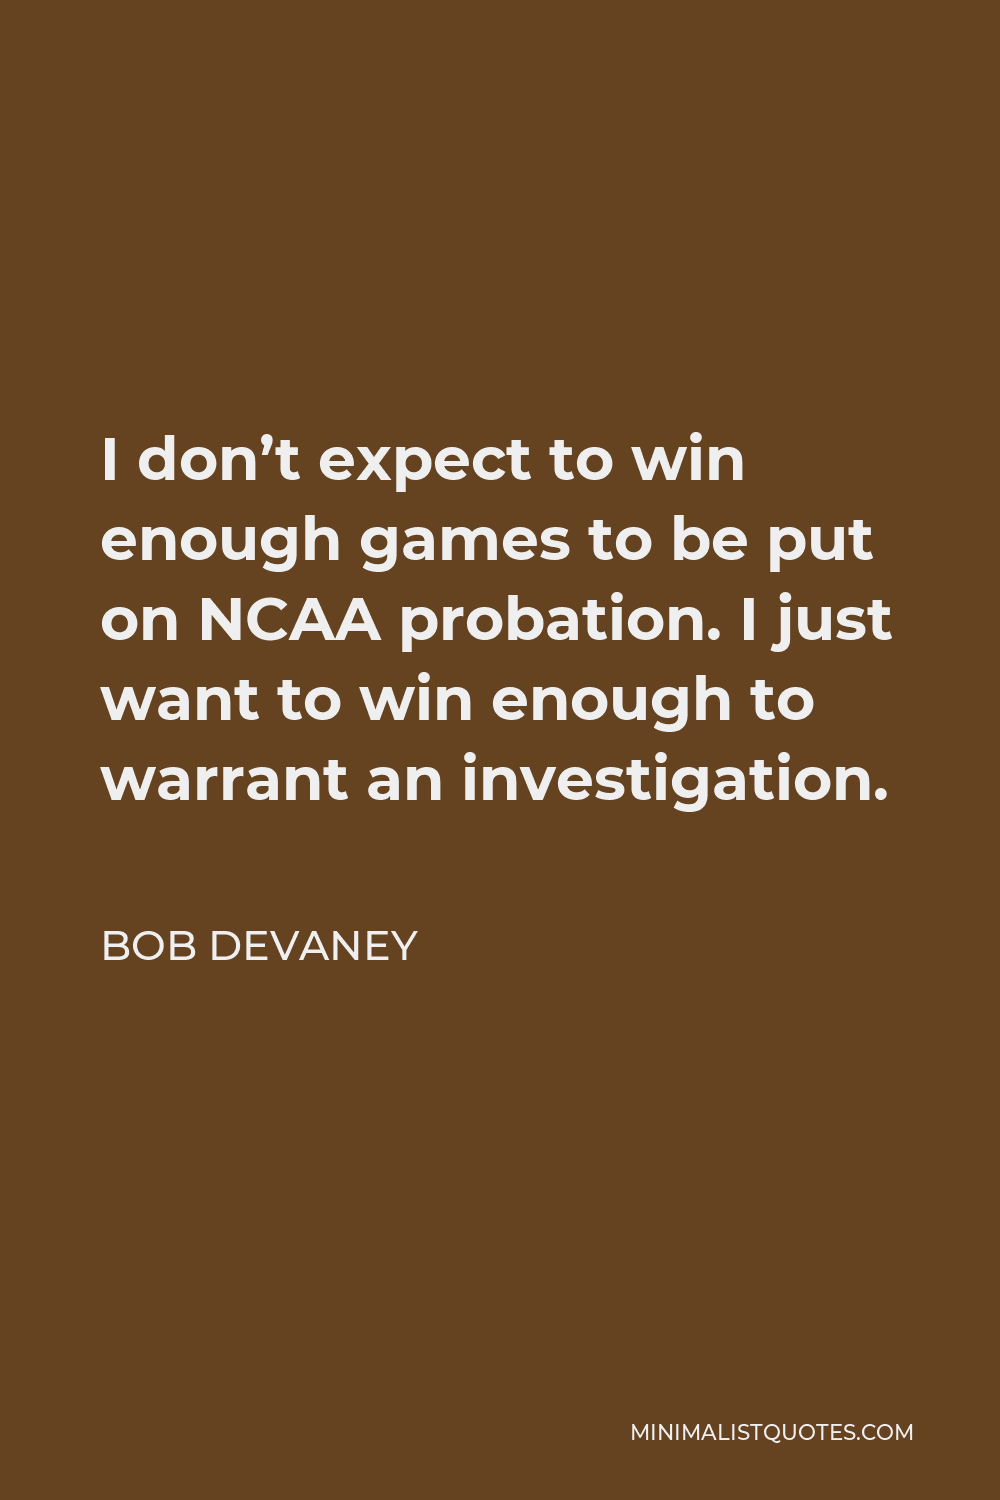 Bob Devaney Quote - I don’t expect to win enough games to be put on NCAA probation. I just want to win enough to warrant an investigation.